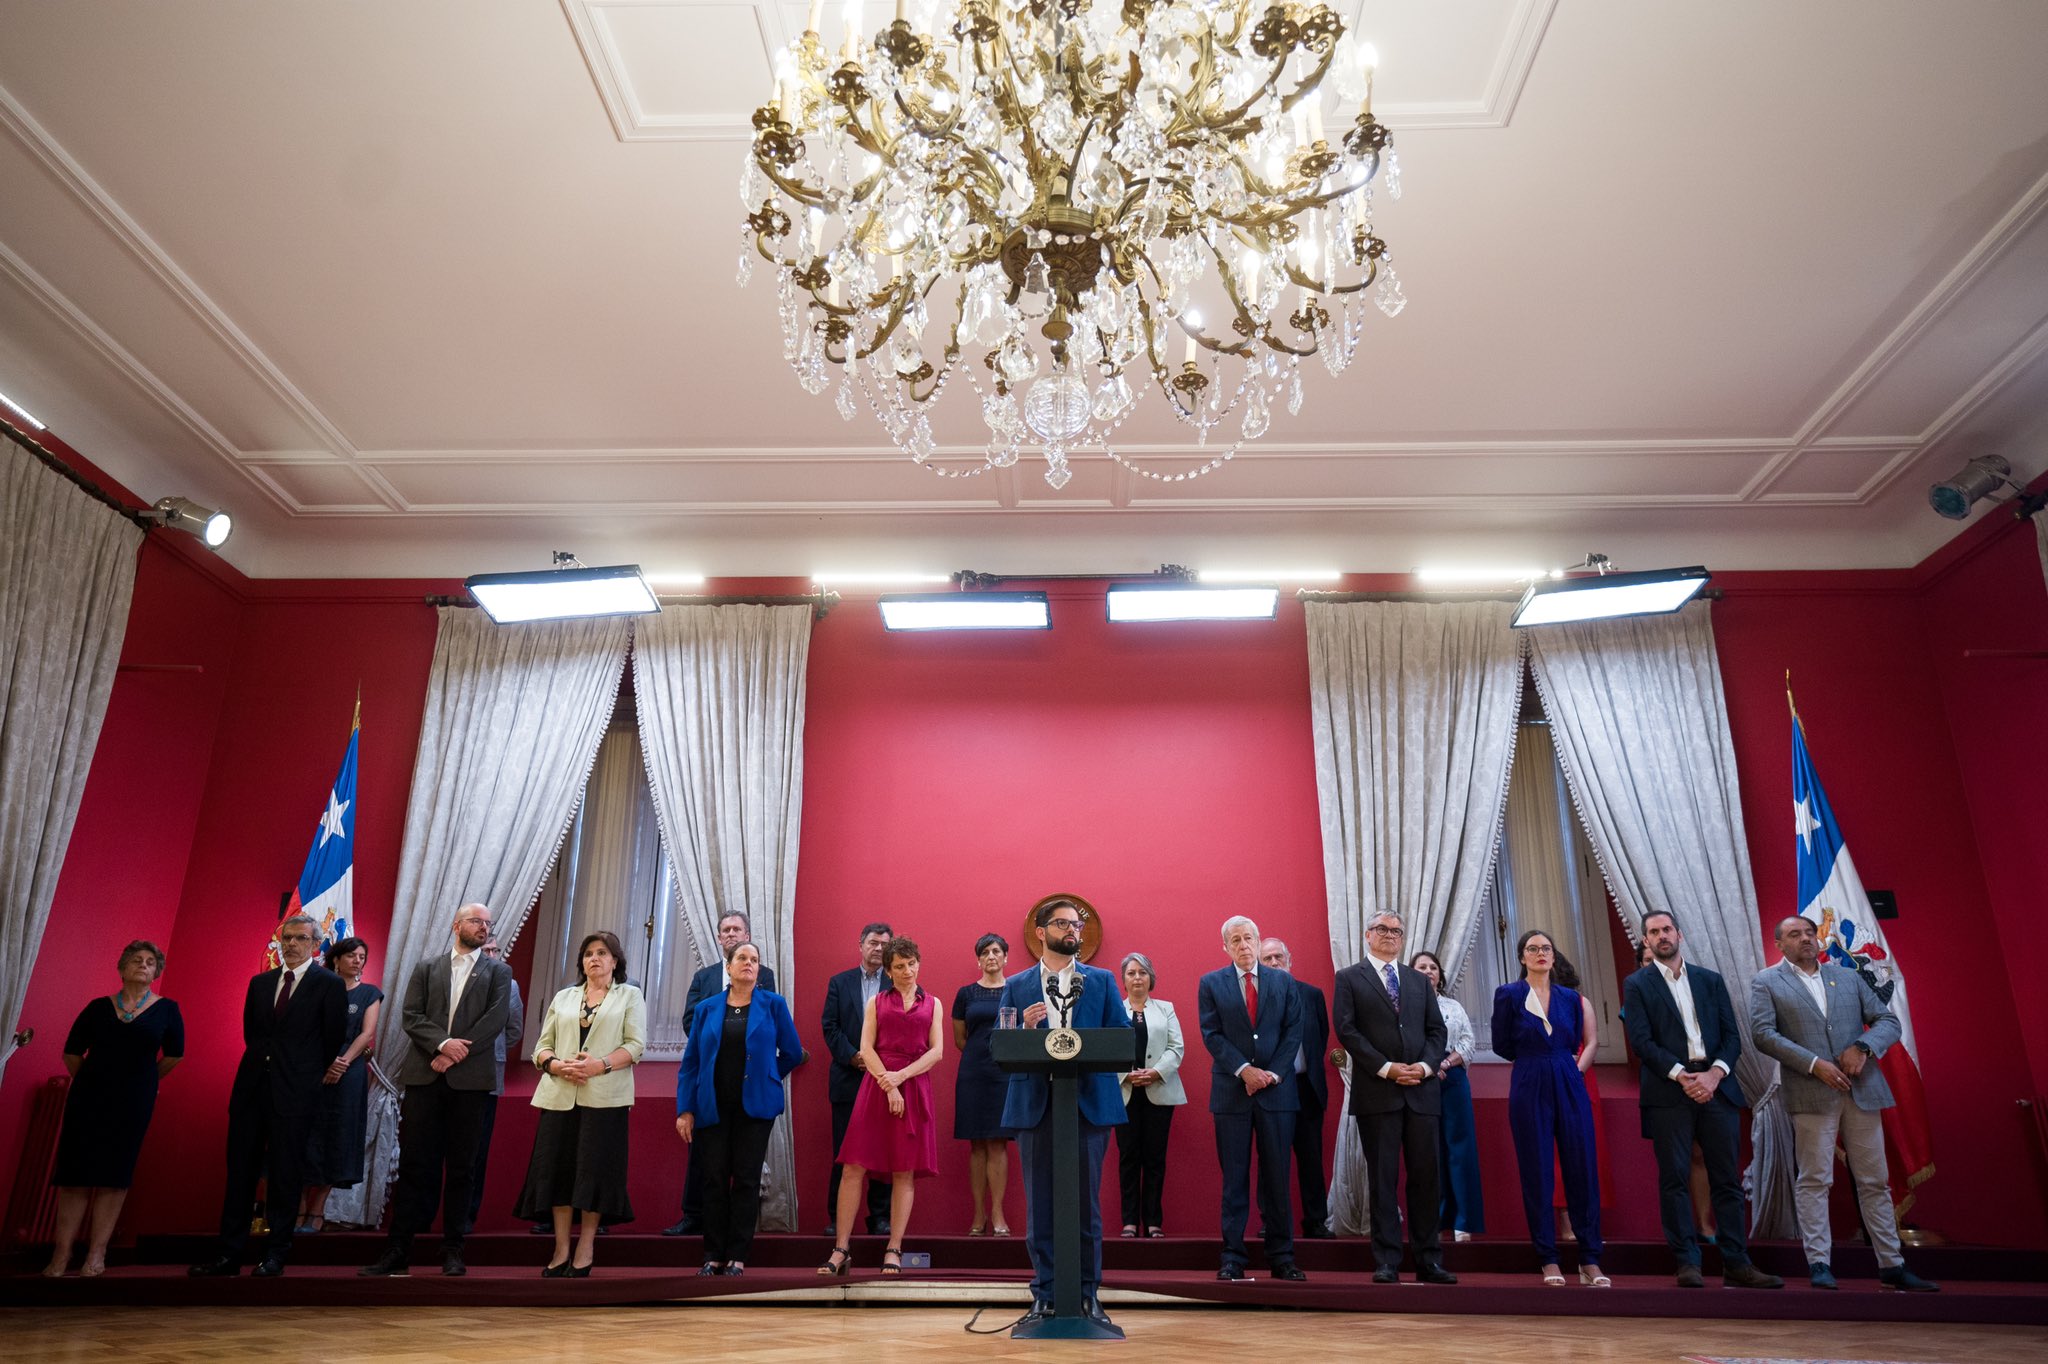 Chilean President Gabriel Boric standing in front of his new cabinet. Photo: Twitter/@GabrielBoric.